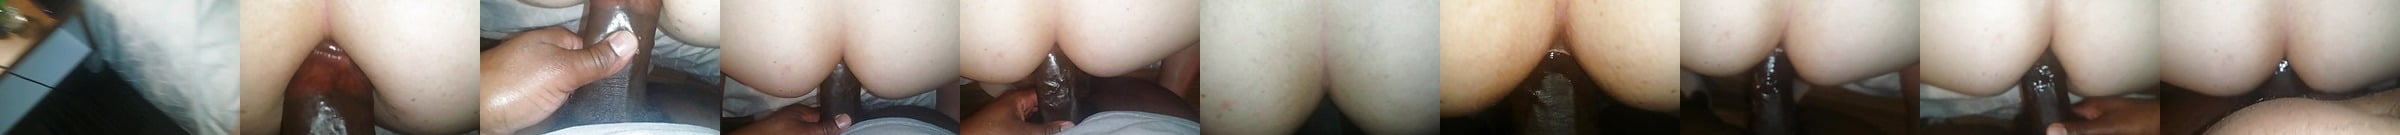 White Woman Taken By Accident In The Butt By A Bbc Porn